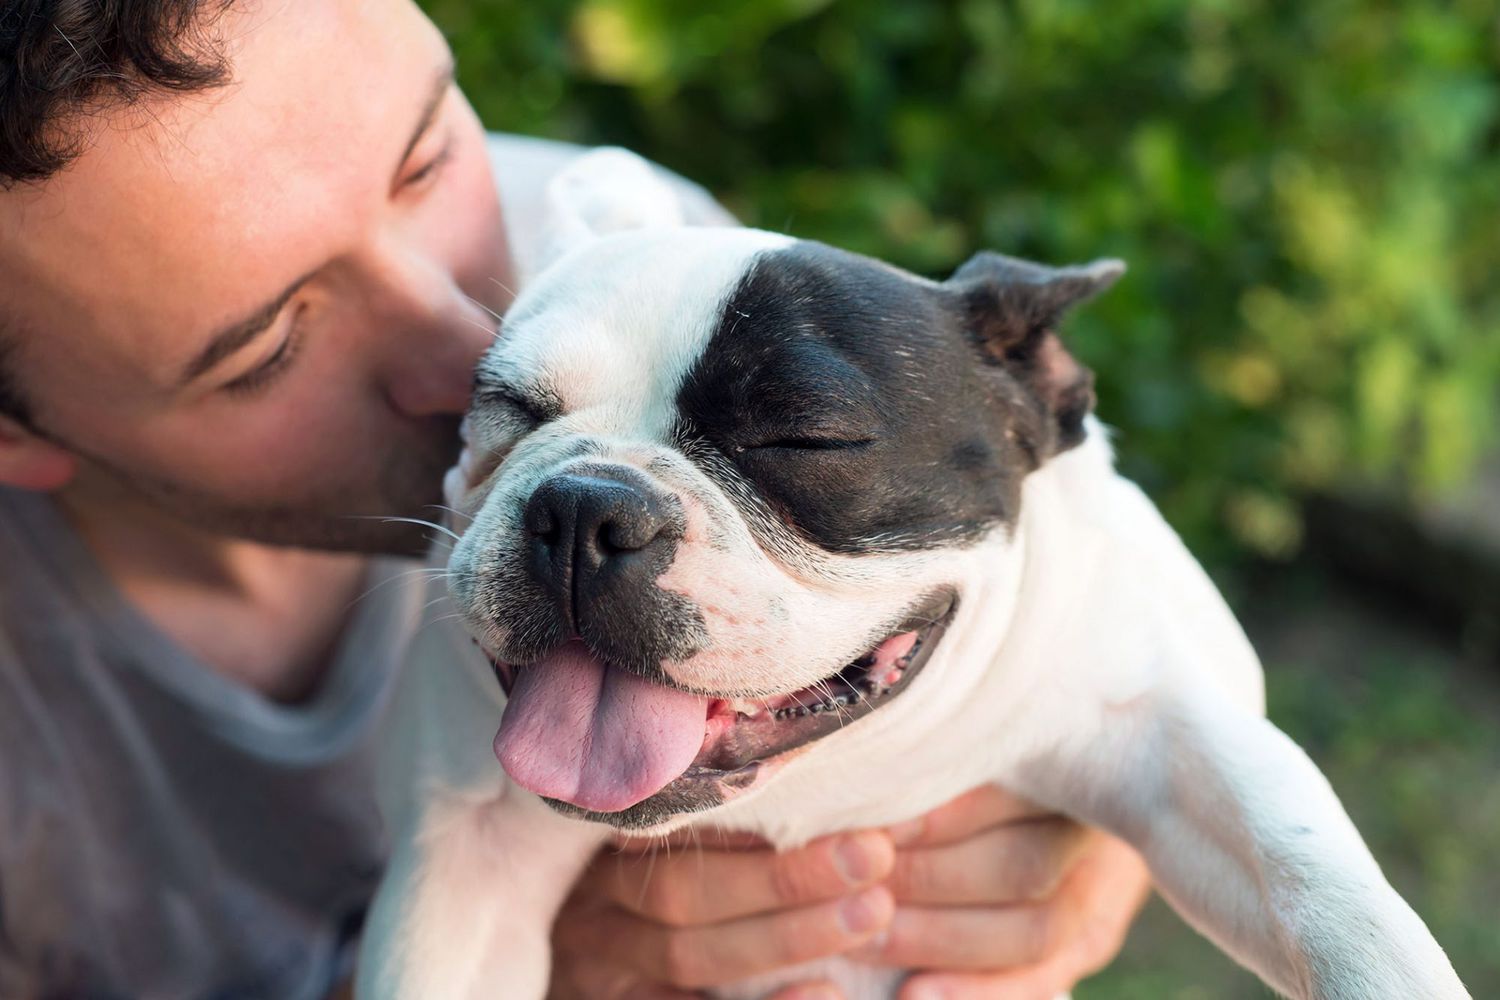 3 Simple Steps to Help New Pet Parents Prepare for Their First Fur Baby